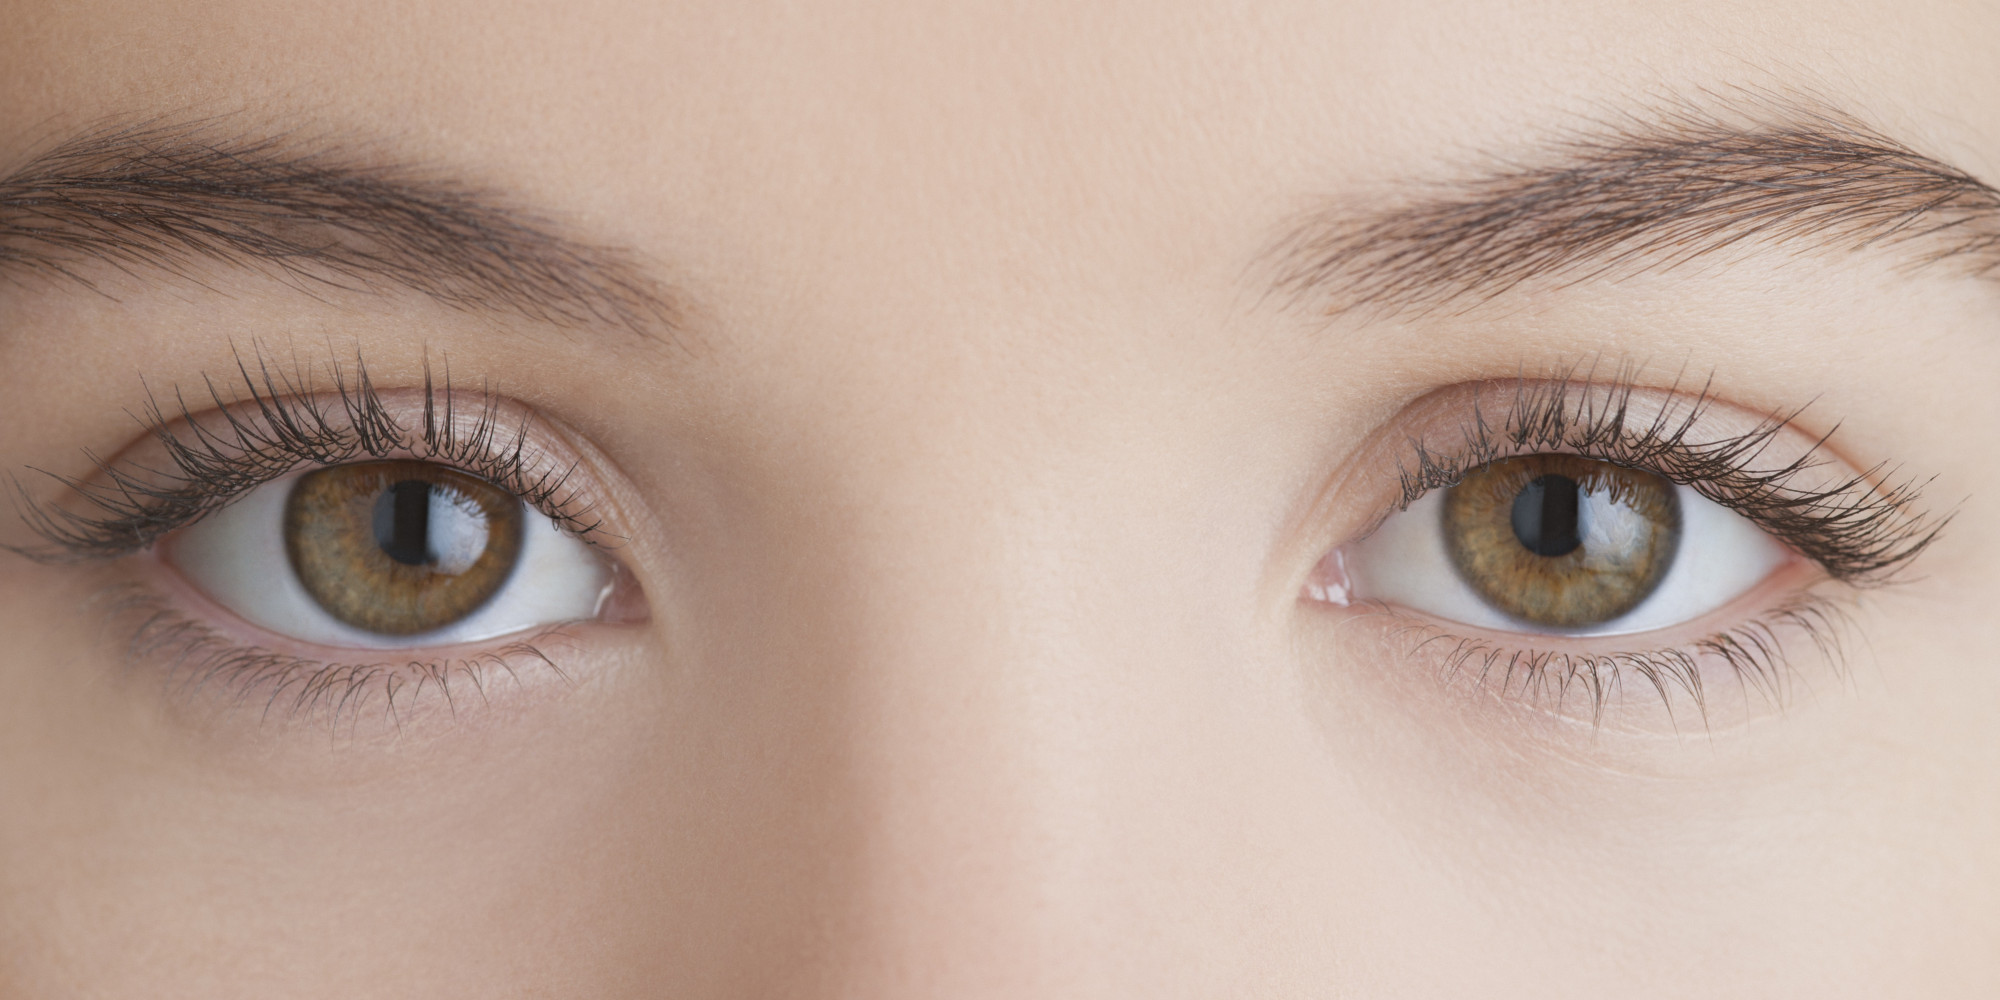 Give Thanks for Your Eyes: 7 Amazing Facts | HuffPost